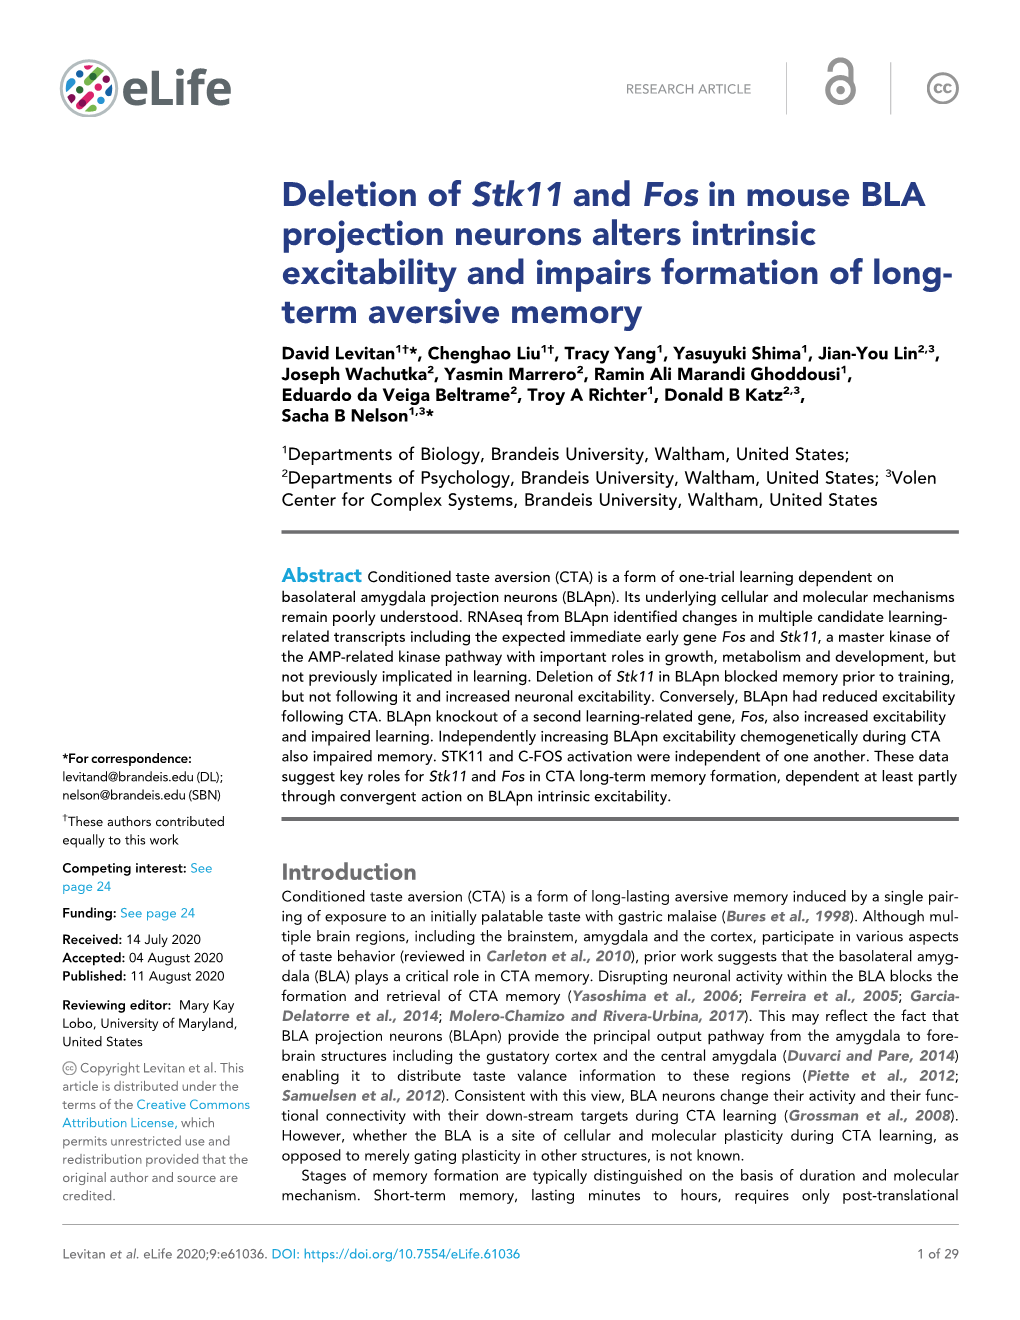 Deletion of Stk11 and Fos in Mouse BLA Projection Neurons